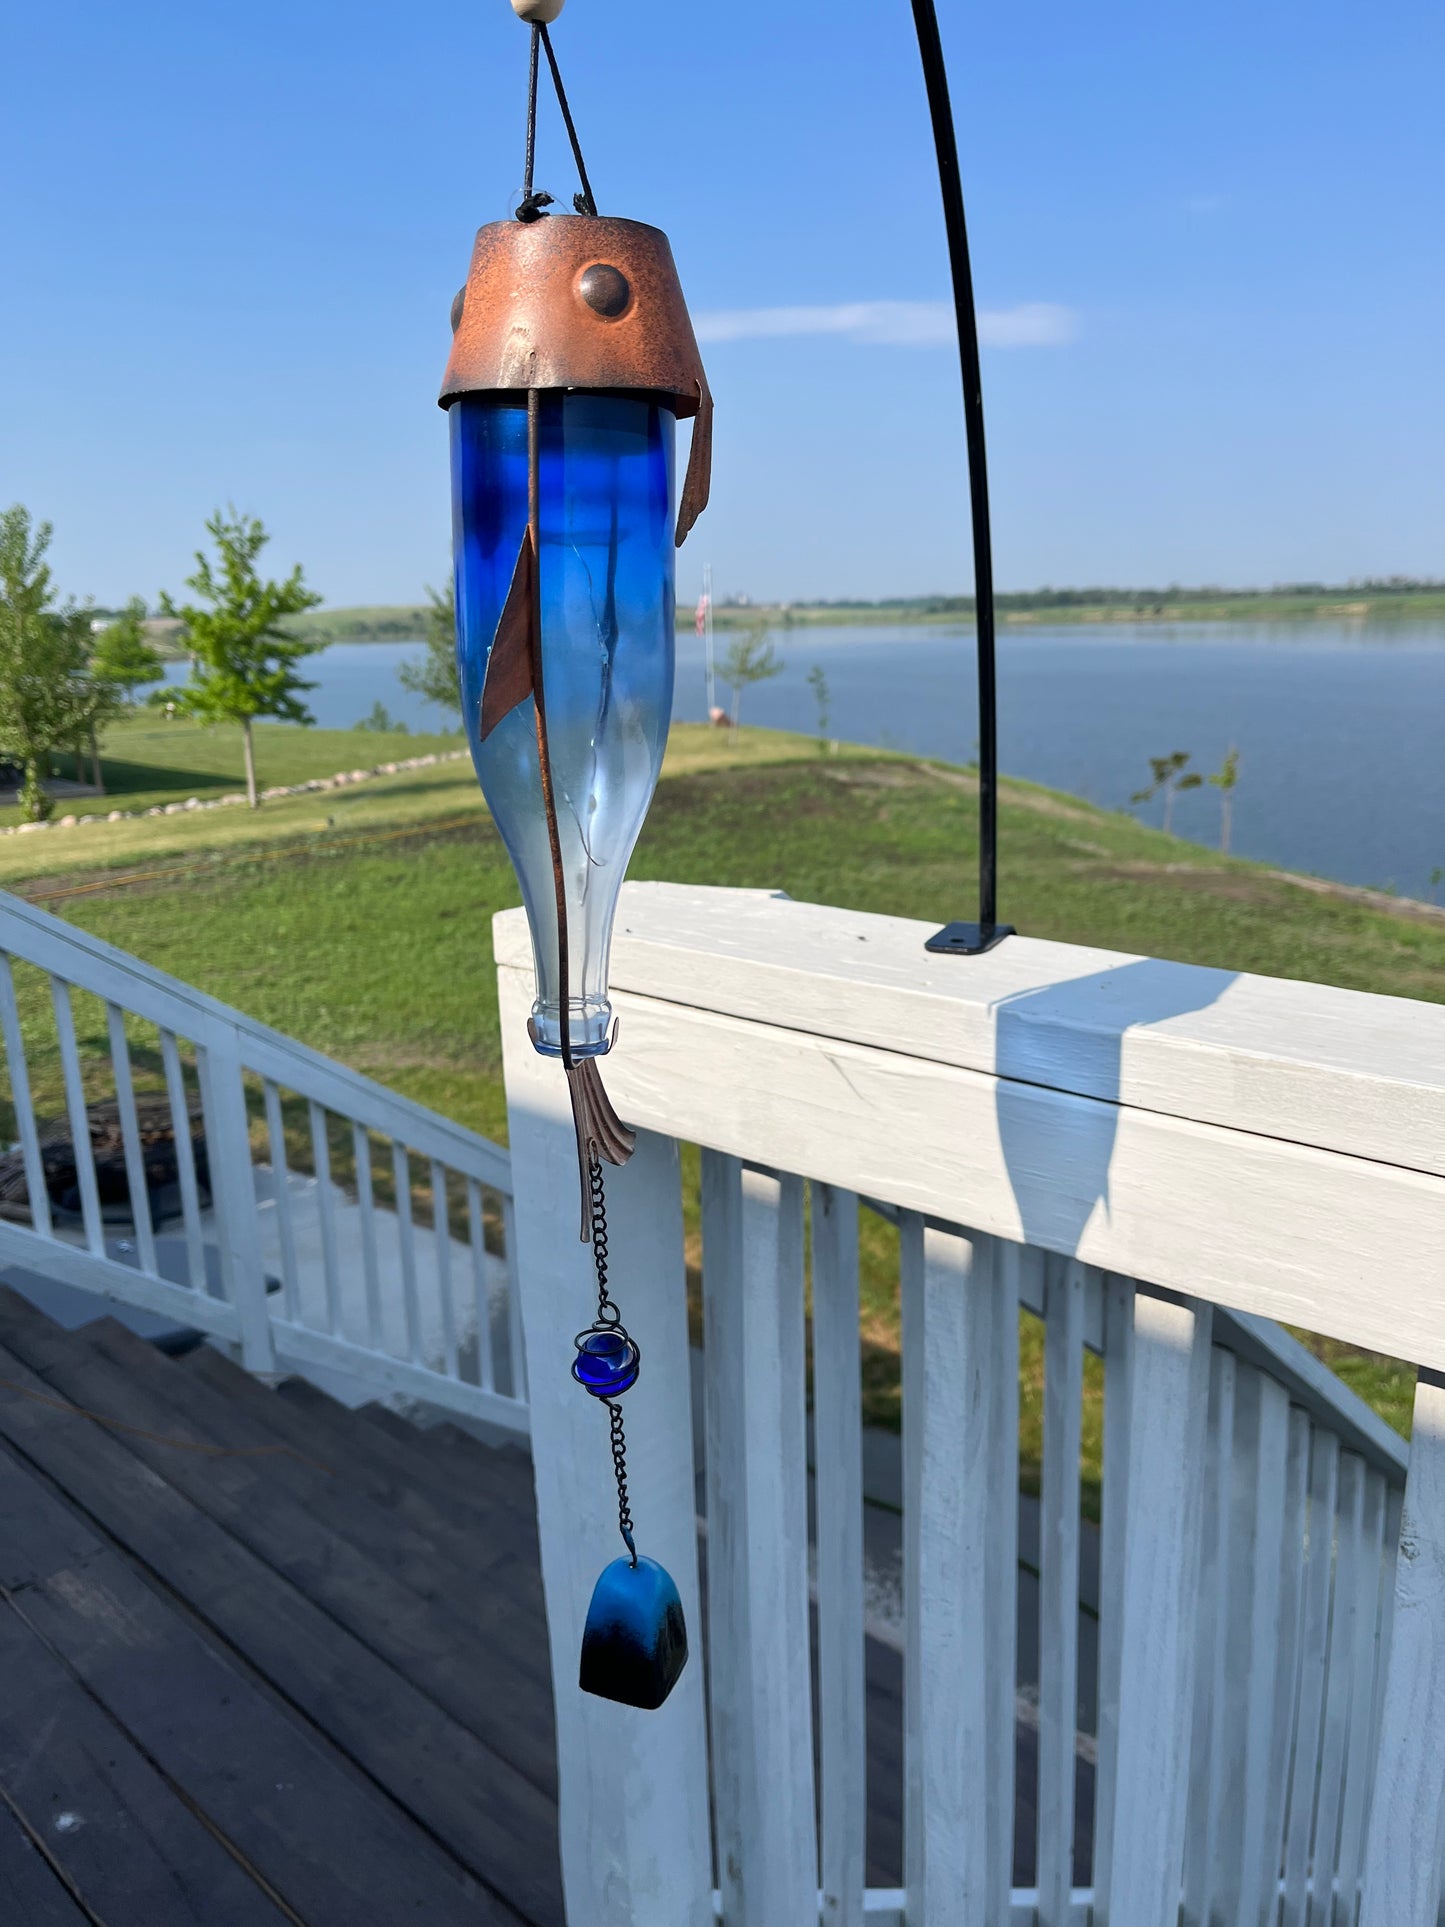 LED Bottle Hanging Windchime with Bell